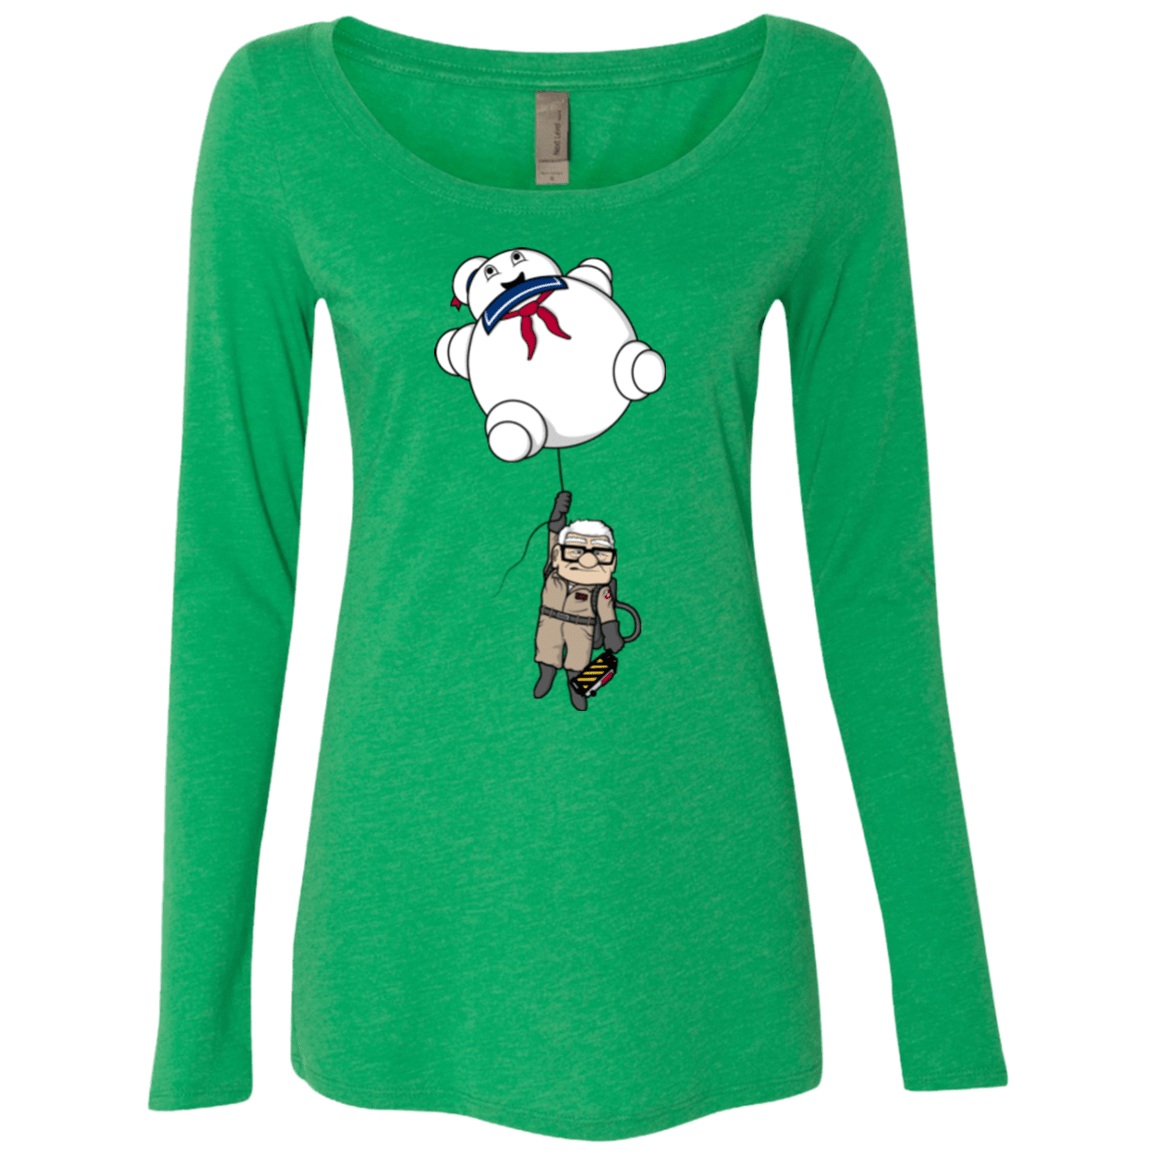 T-Shirts Envy / Small Up Busters Women's Triblend Long Sleeve Shirt